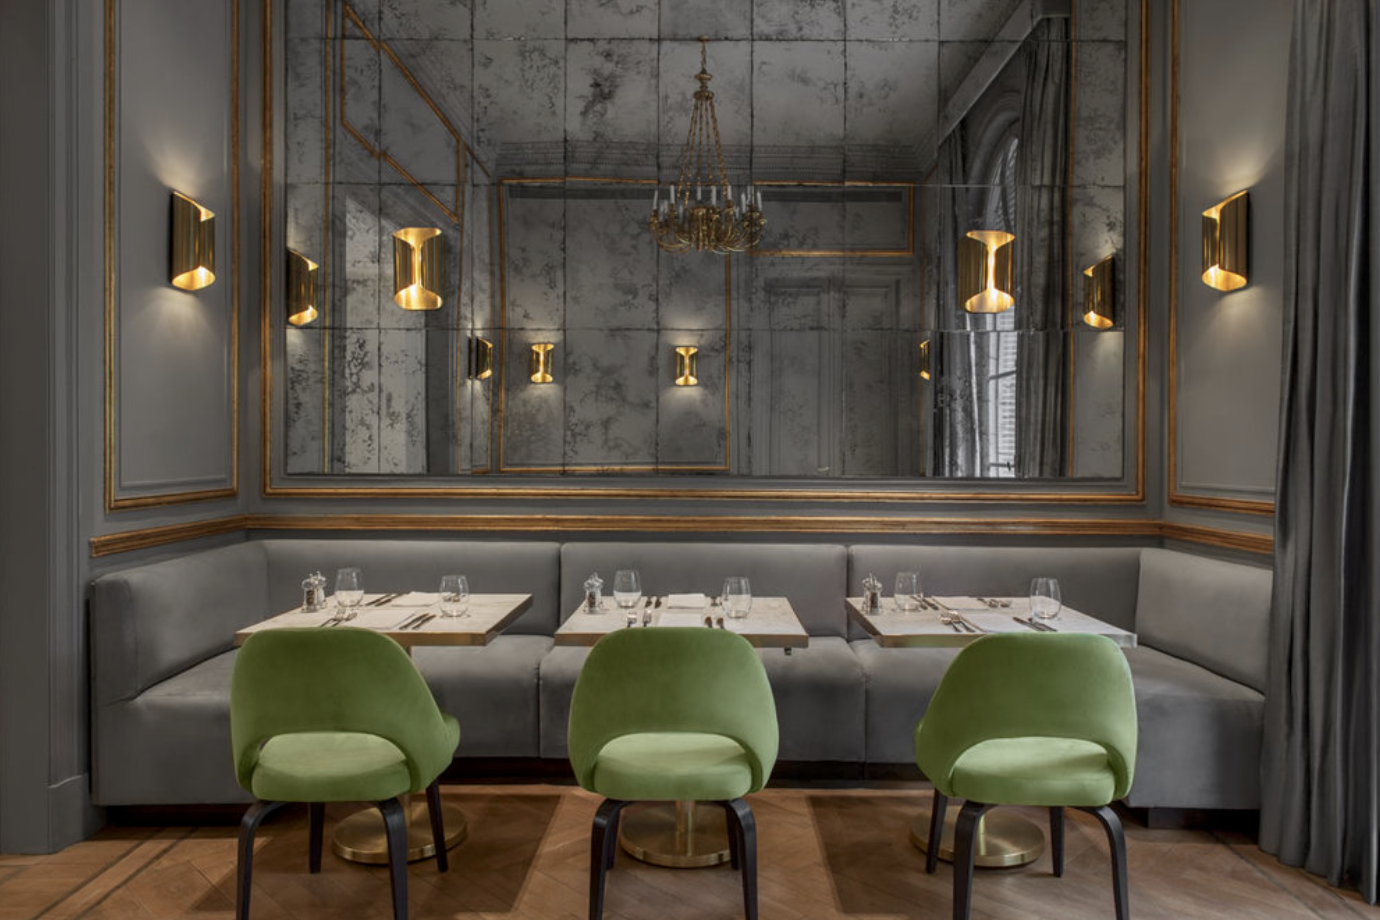 Thebetterplaces_casacavia_buenosaires_lunch_cityguide.png